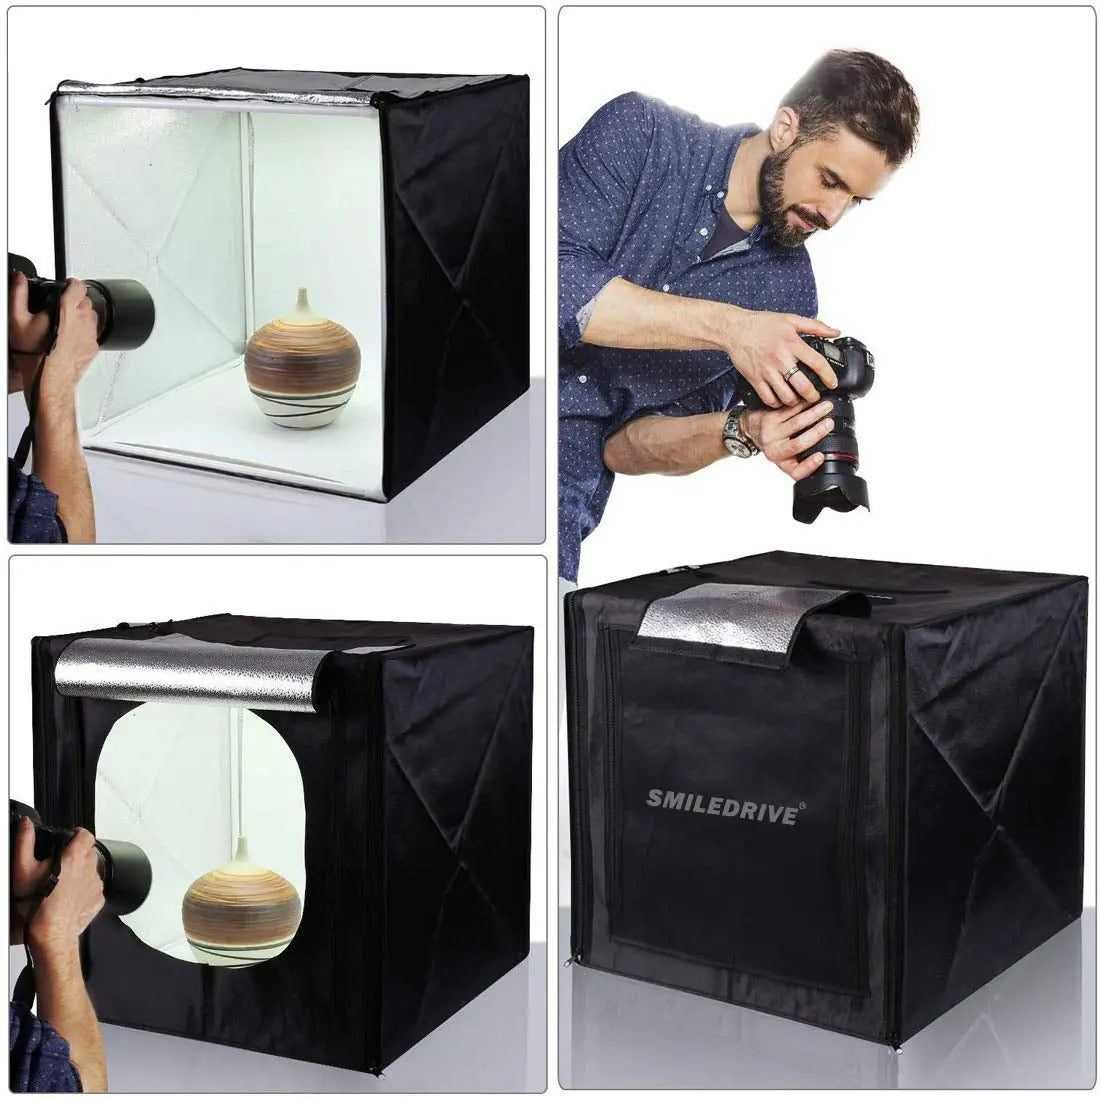 HitTopss Photo Studio Light Box for Photography, 24x24x24 Professional  LightBox Shooting Tent Kit with 6 Color Backdrops for Jewelry and Product